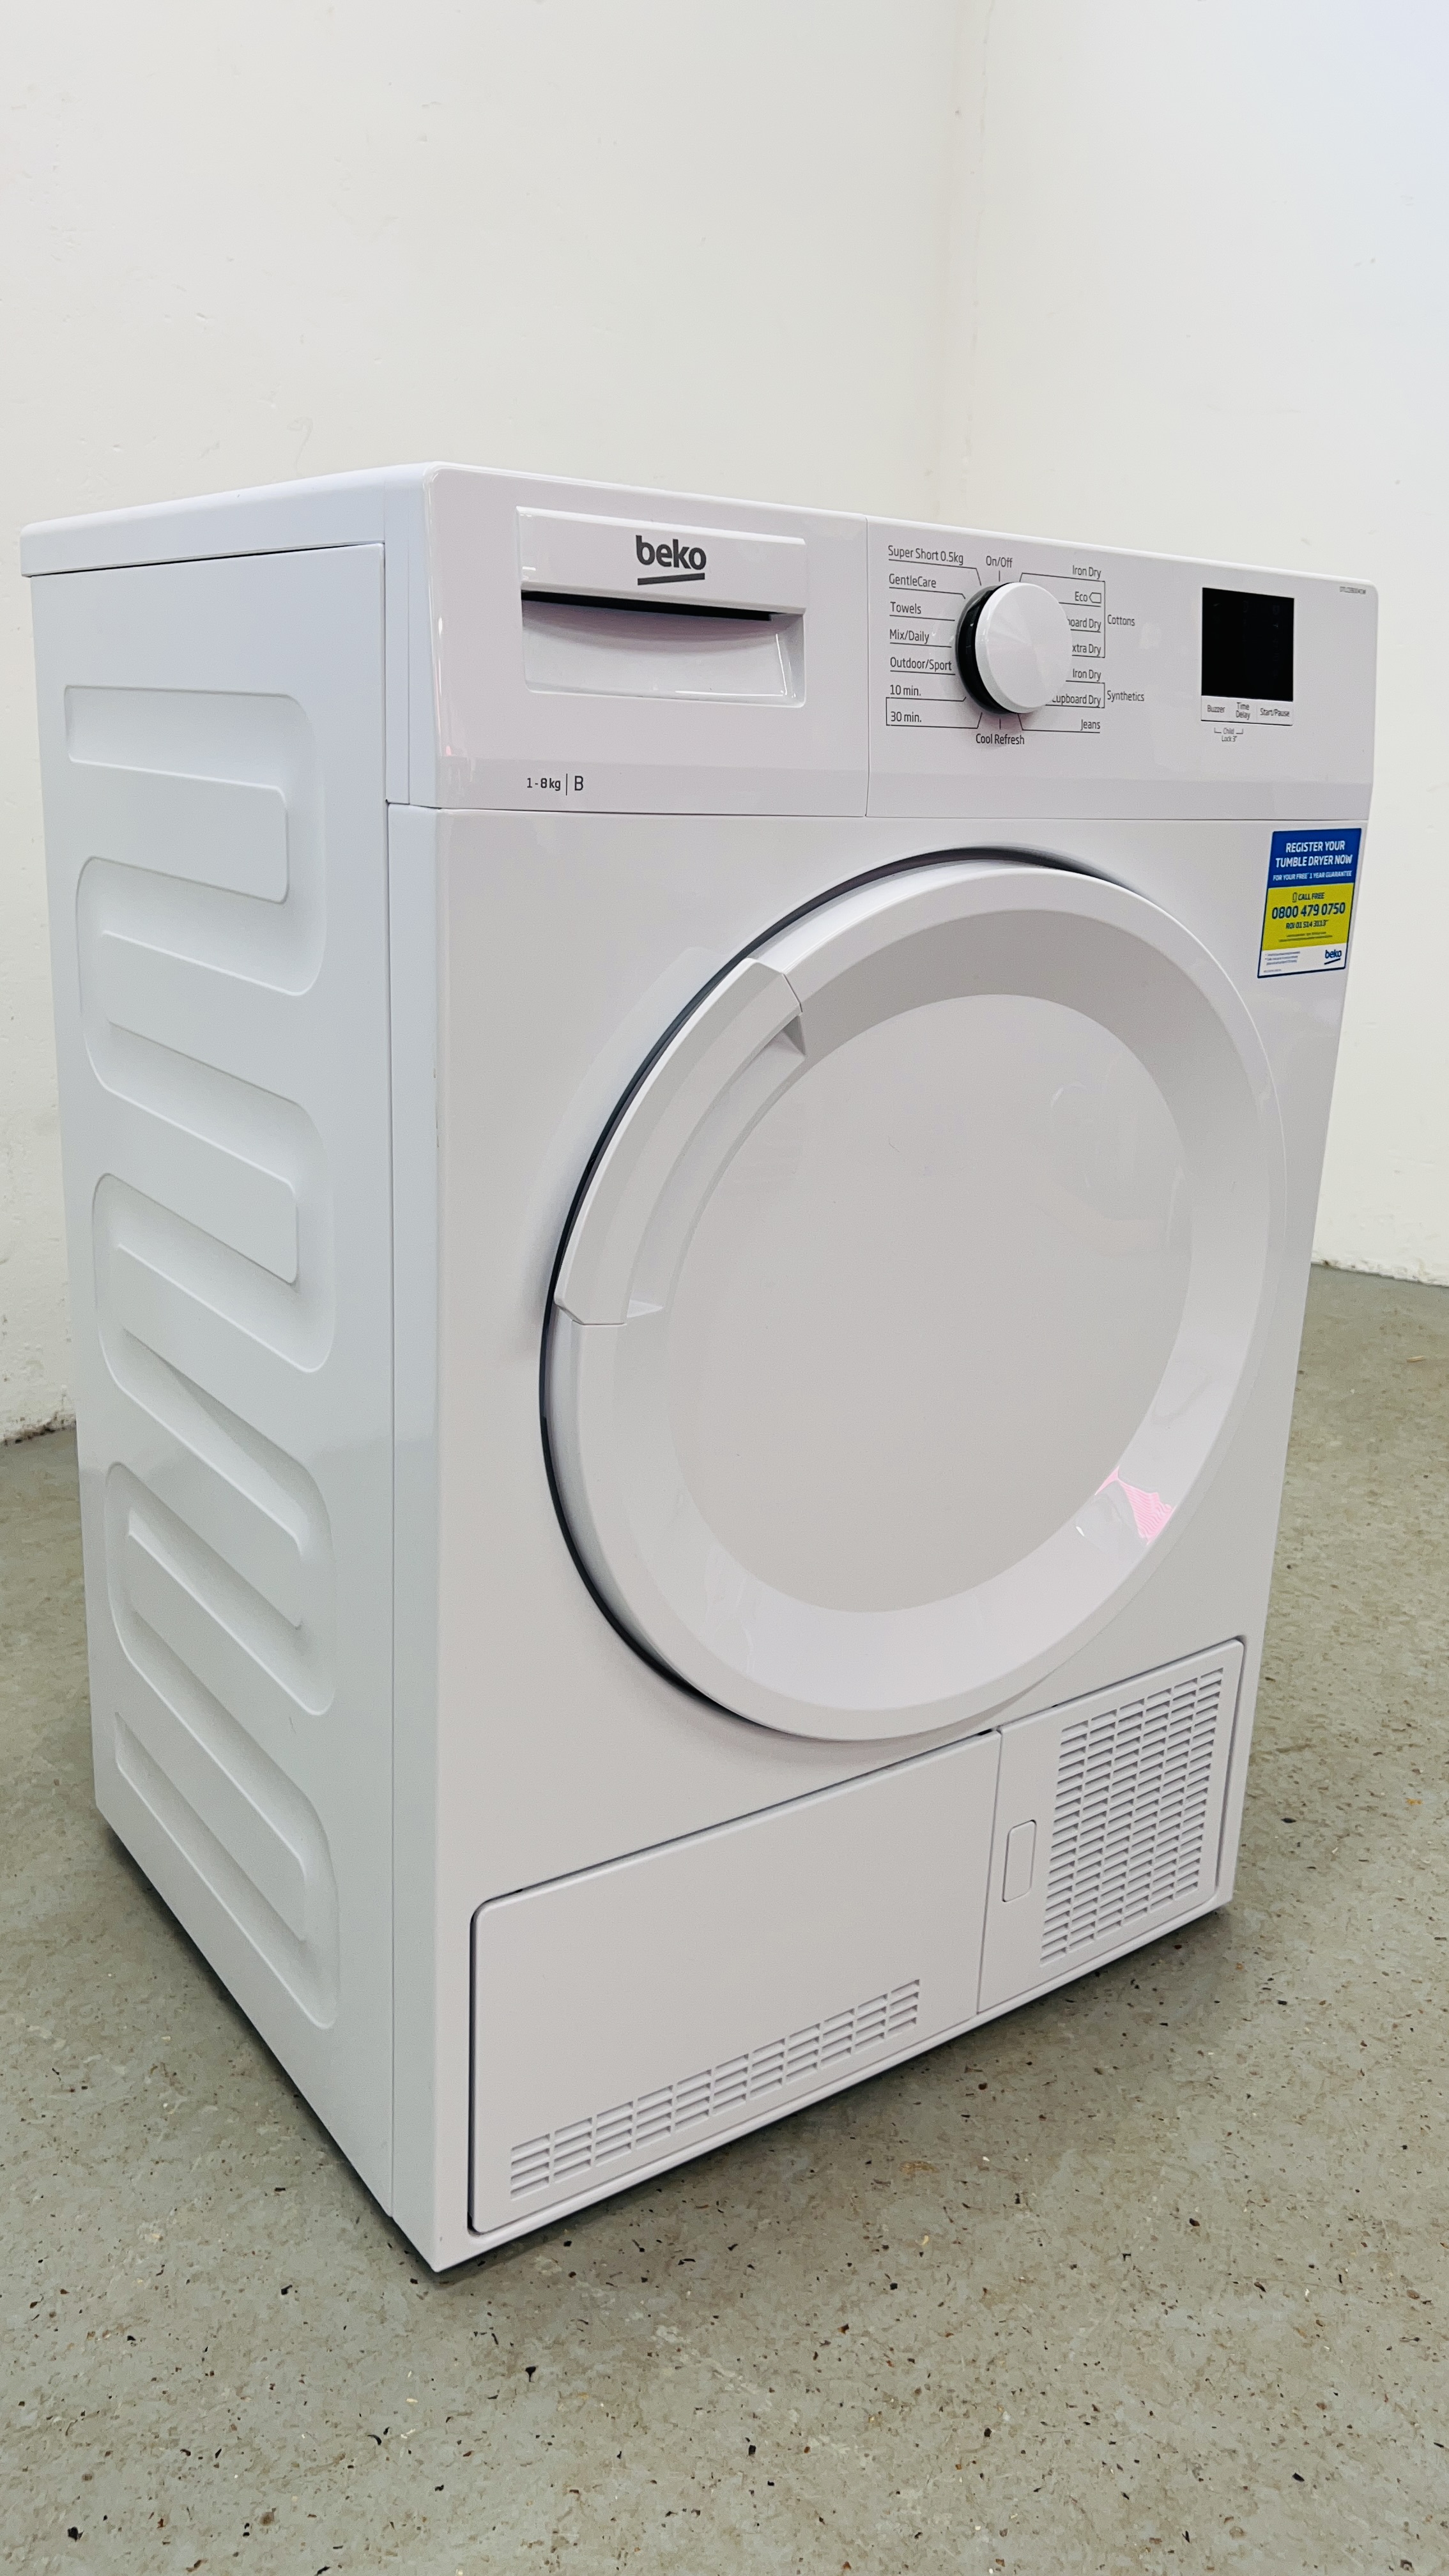 BEKO DTLCE80041W 8KG TUMBLE DRYER - SOLD AS SEEN. - Image 4 of 9